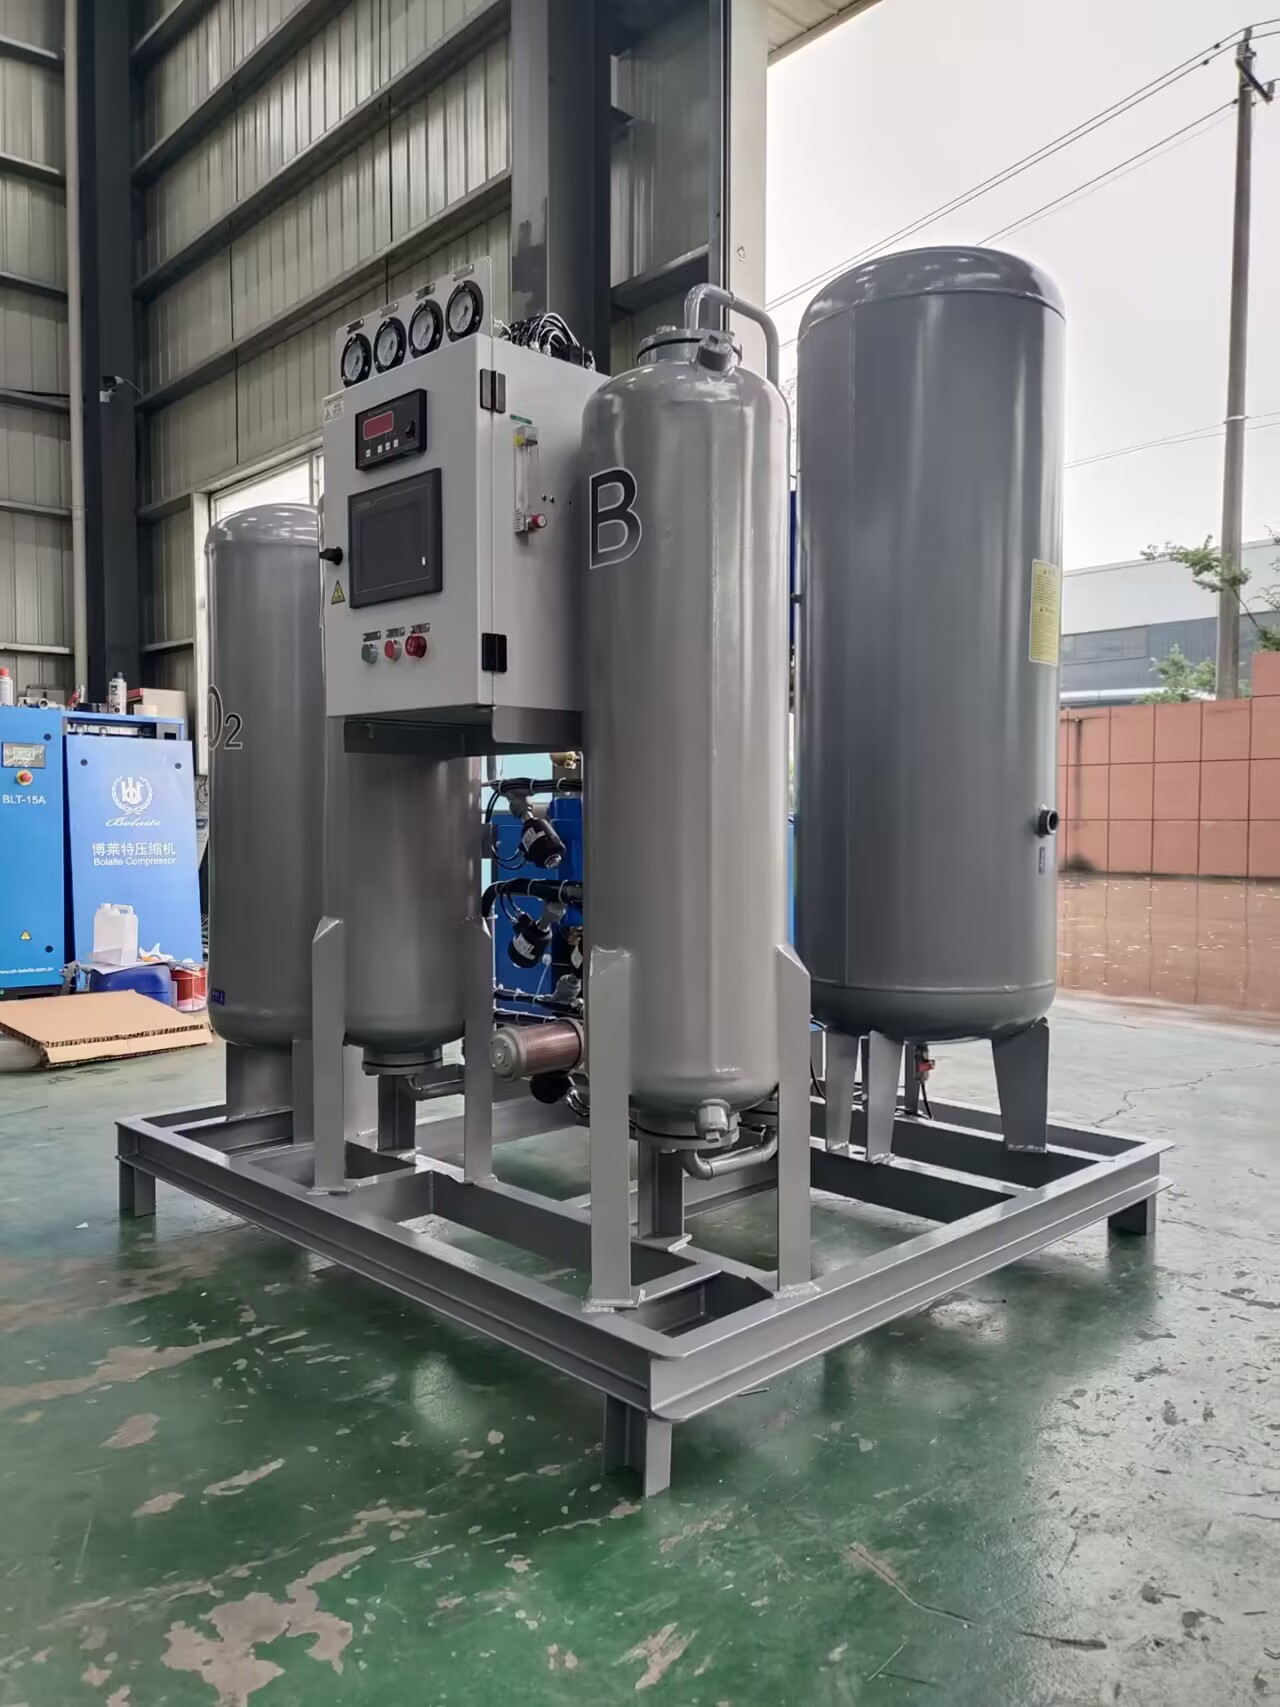 Large ozone generator Oxygen concentrator sewage treatment industrial wastewater sterilization purification supporting psa oxygen generation equipment